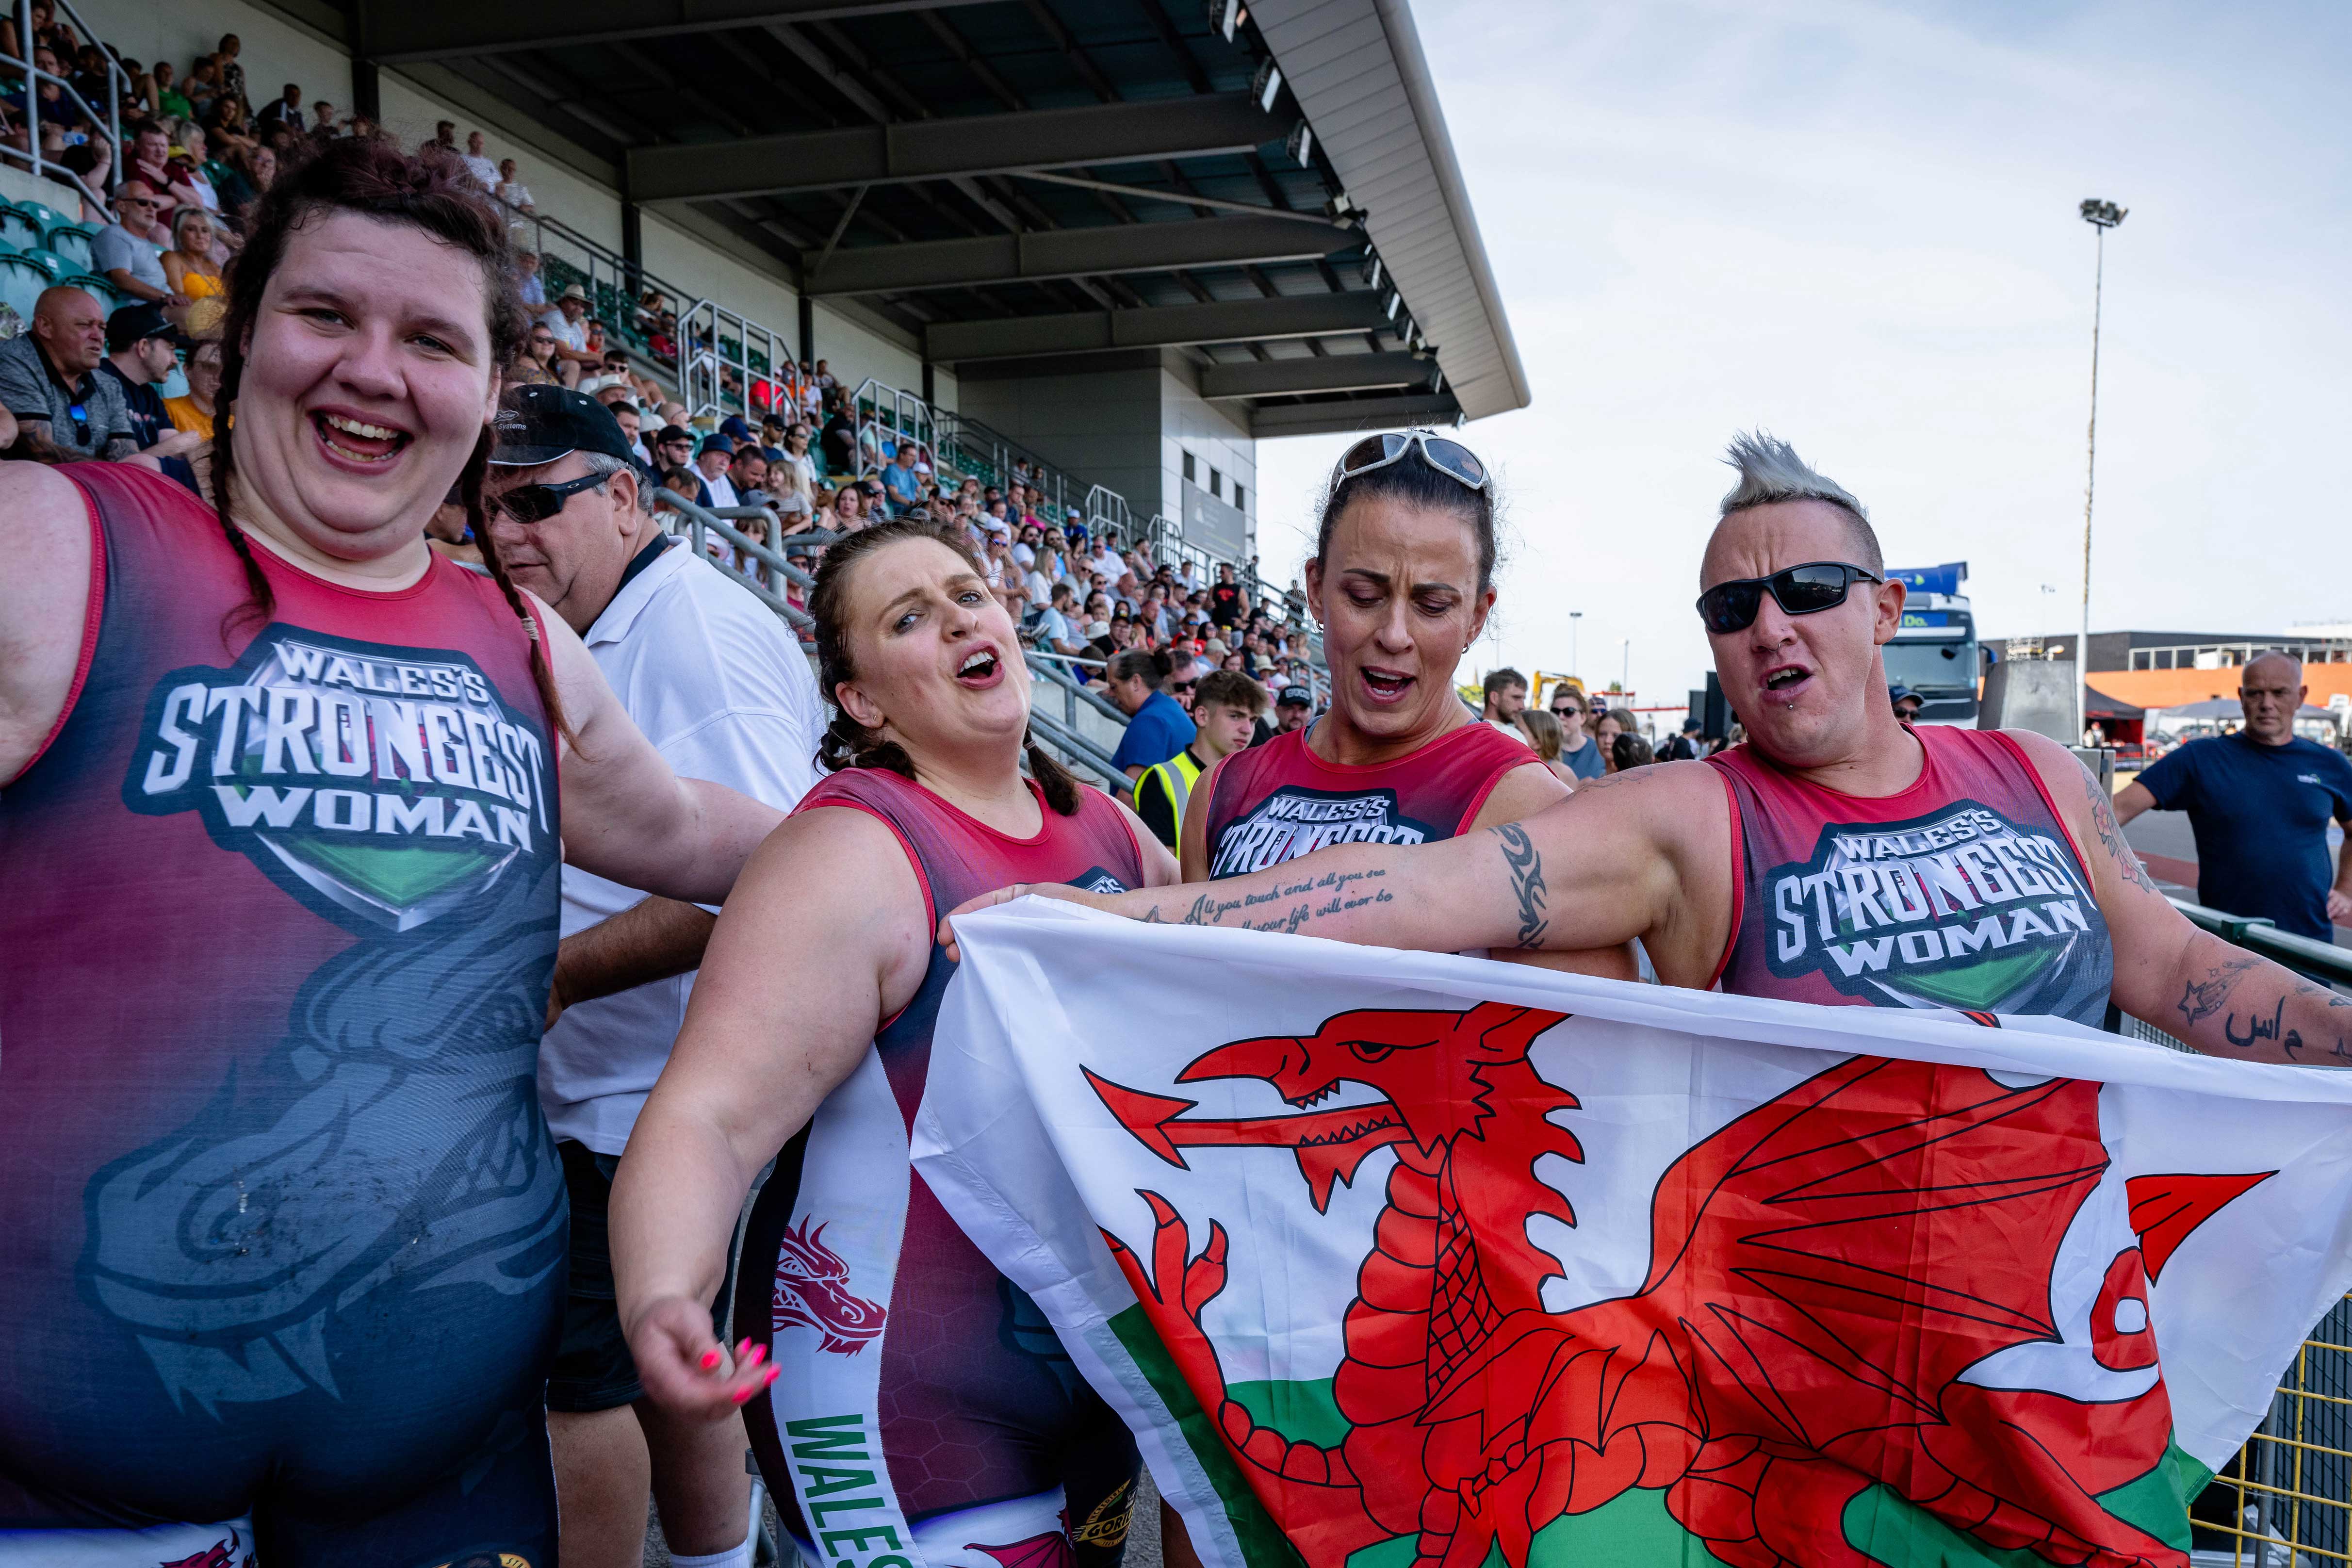 Wales' strongest man and woman crowned for 2022 after brutal